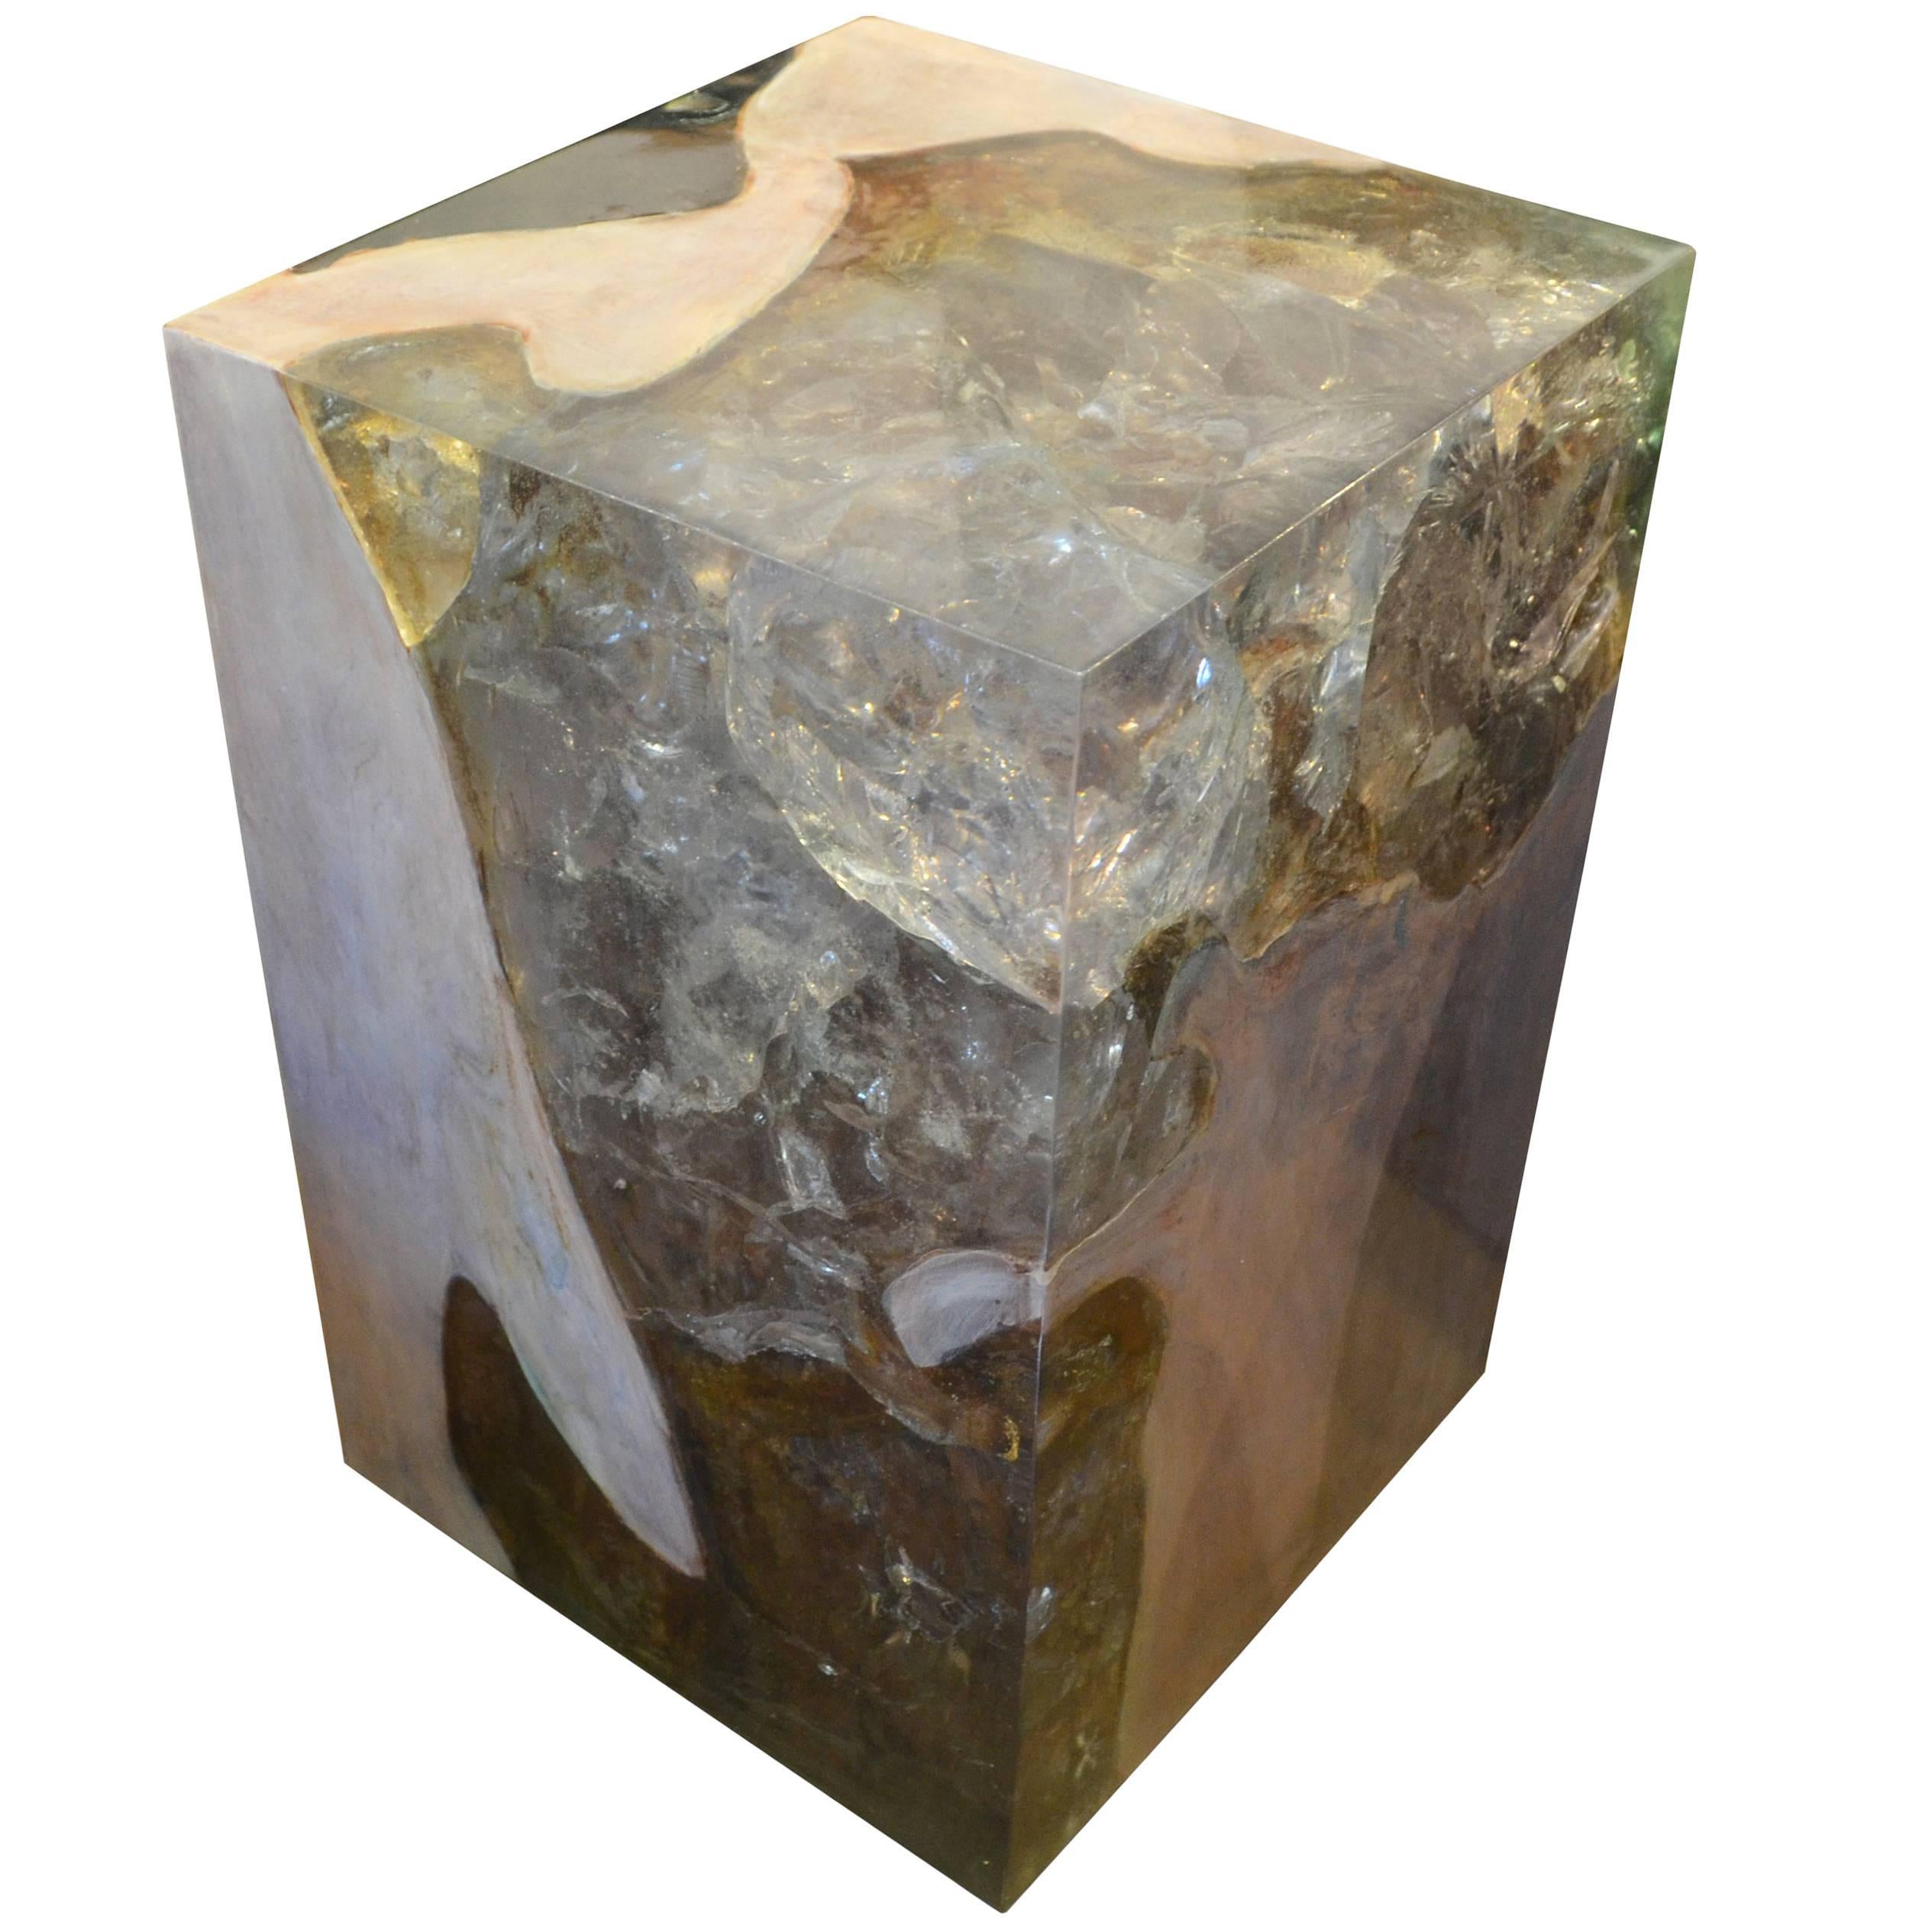 Andrianna Shamaris St. Barts Resin and Bleached Teak Wood Side Table